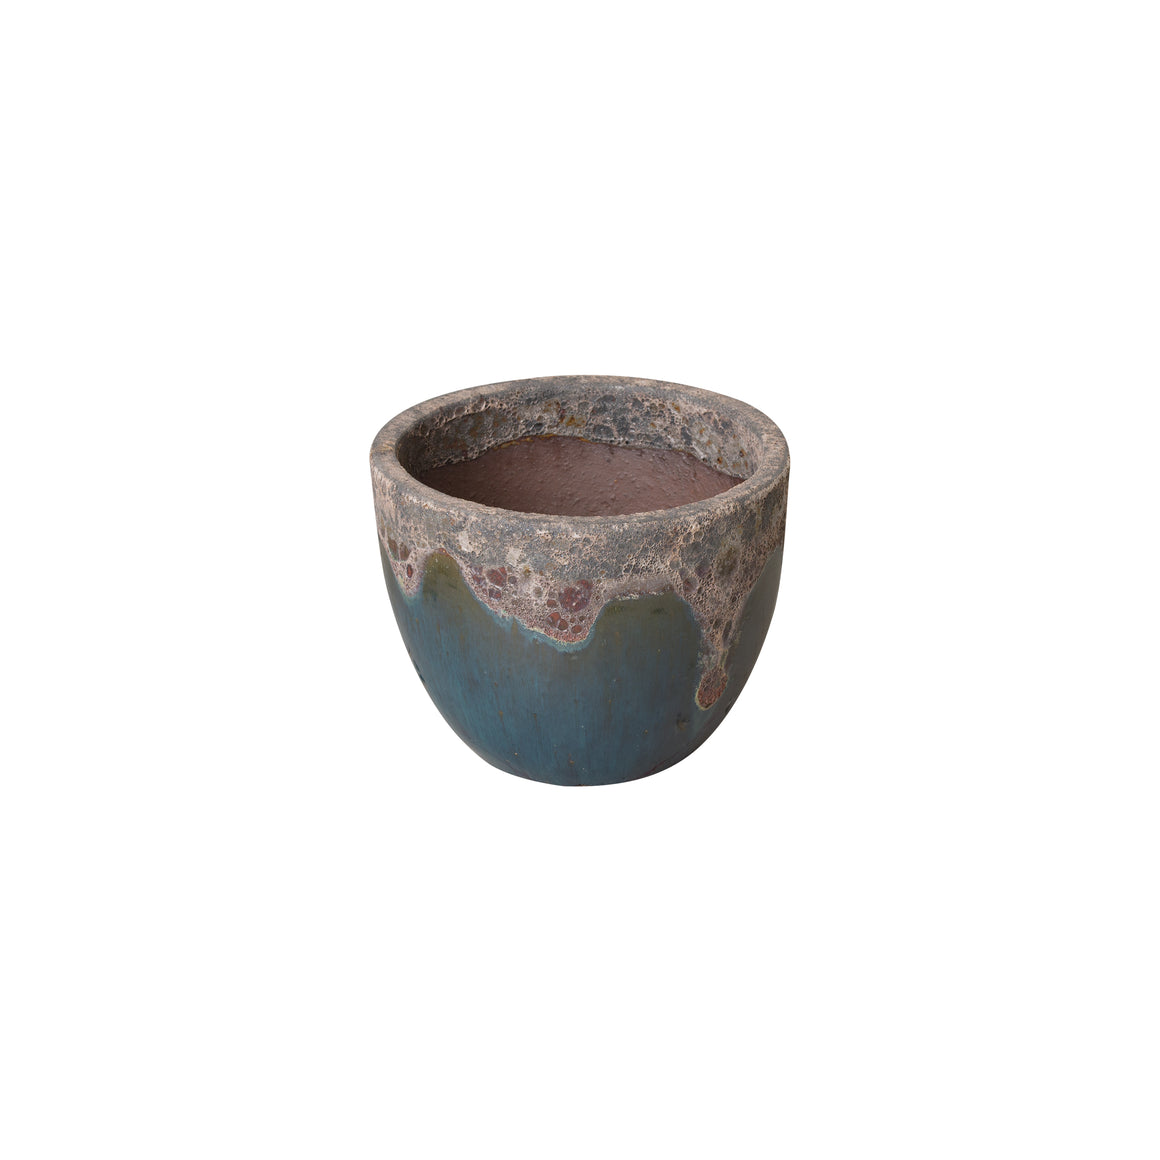 Round Ceramic Planter with a Reef/Teal Glaze